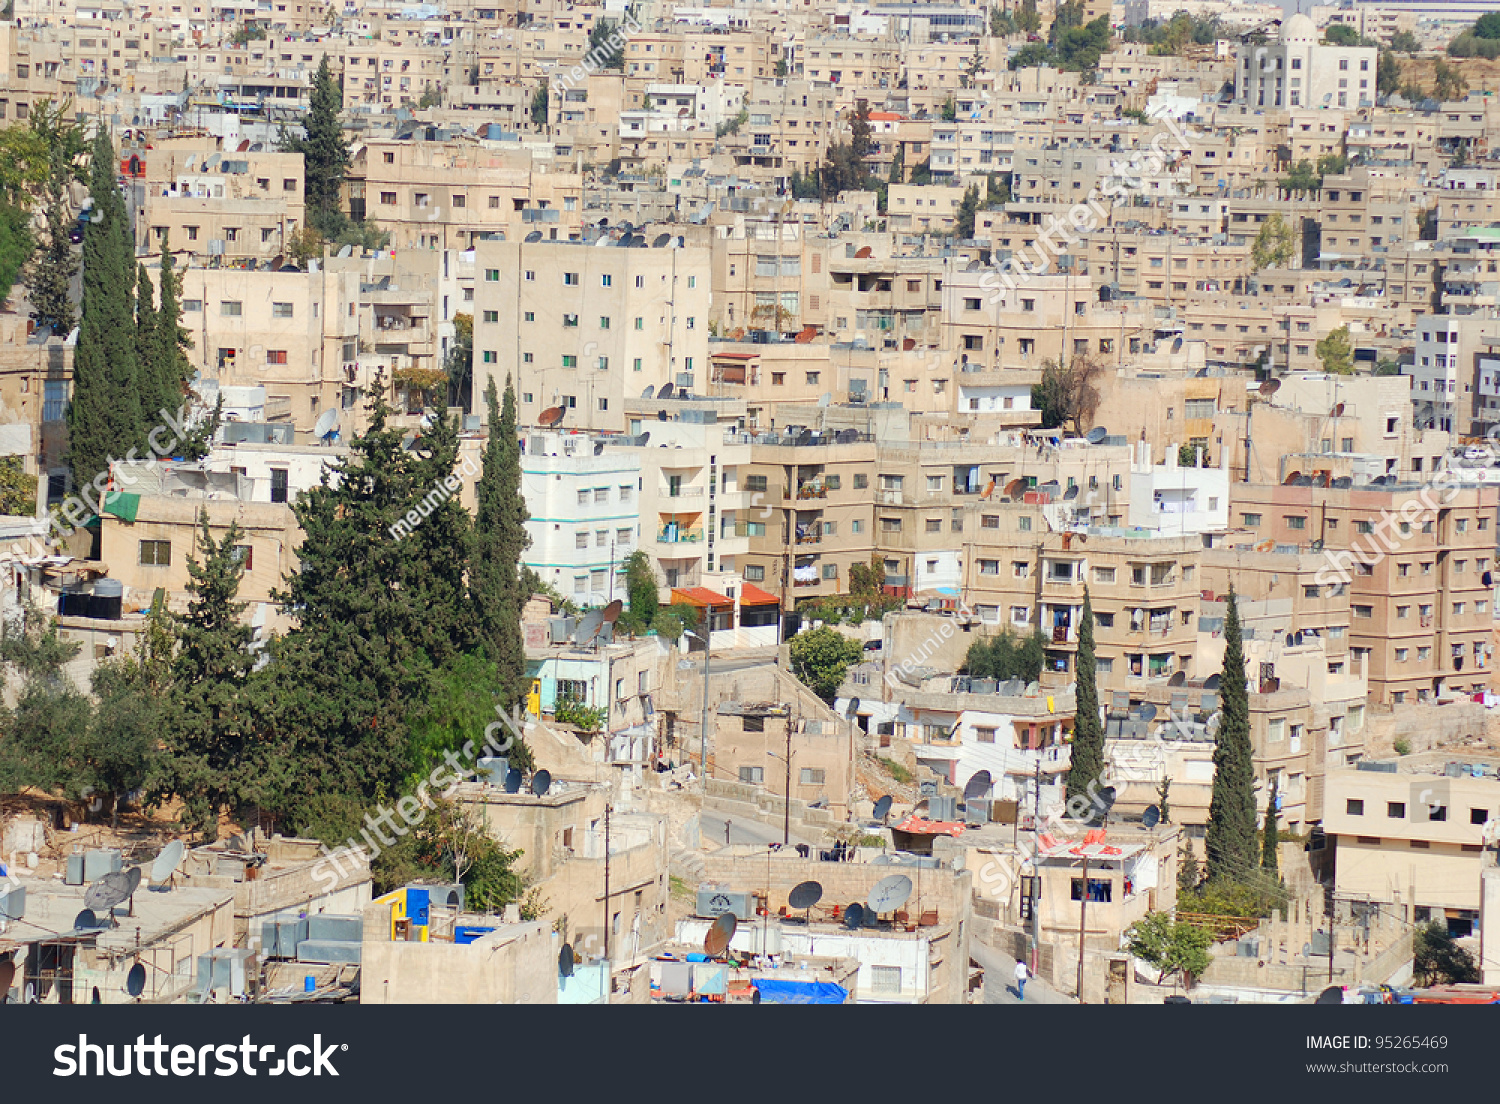 Amman Is The Capital And Largest City Of Jordan It Is The Country S